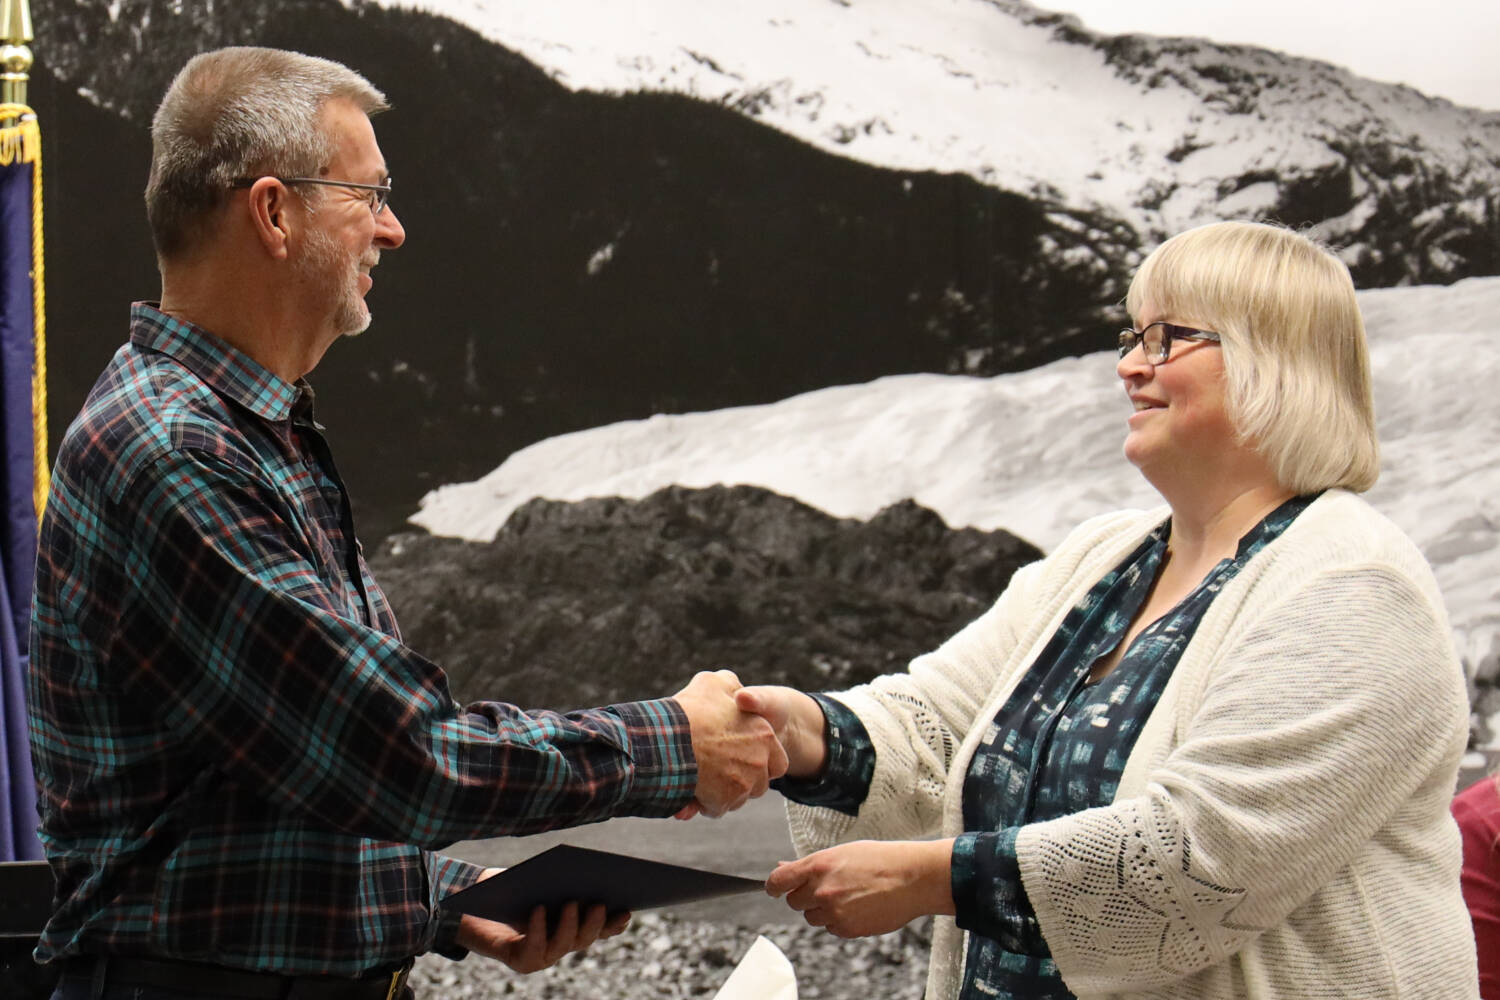 Kirby Day shakes hands with City and Borough of Juneau Mayor Beth Weldon at the Monday night Assembly meeting. Day was awarded a special recognition for his work administrating the city’s Tourism Best Management Practices program. (Clarise Larson / Juneau Empire)